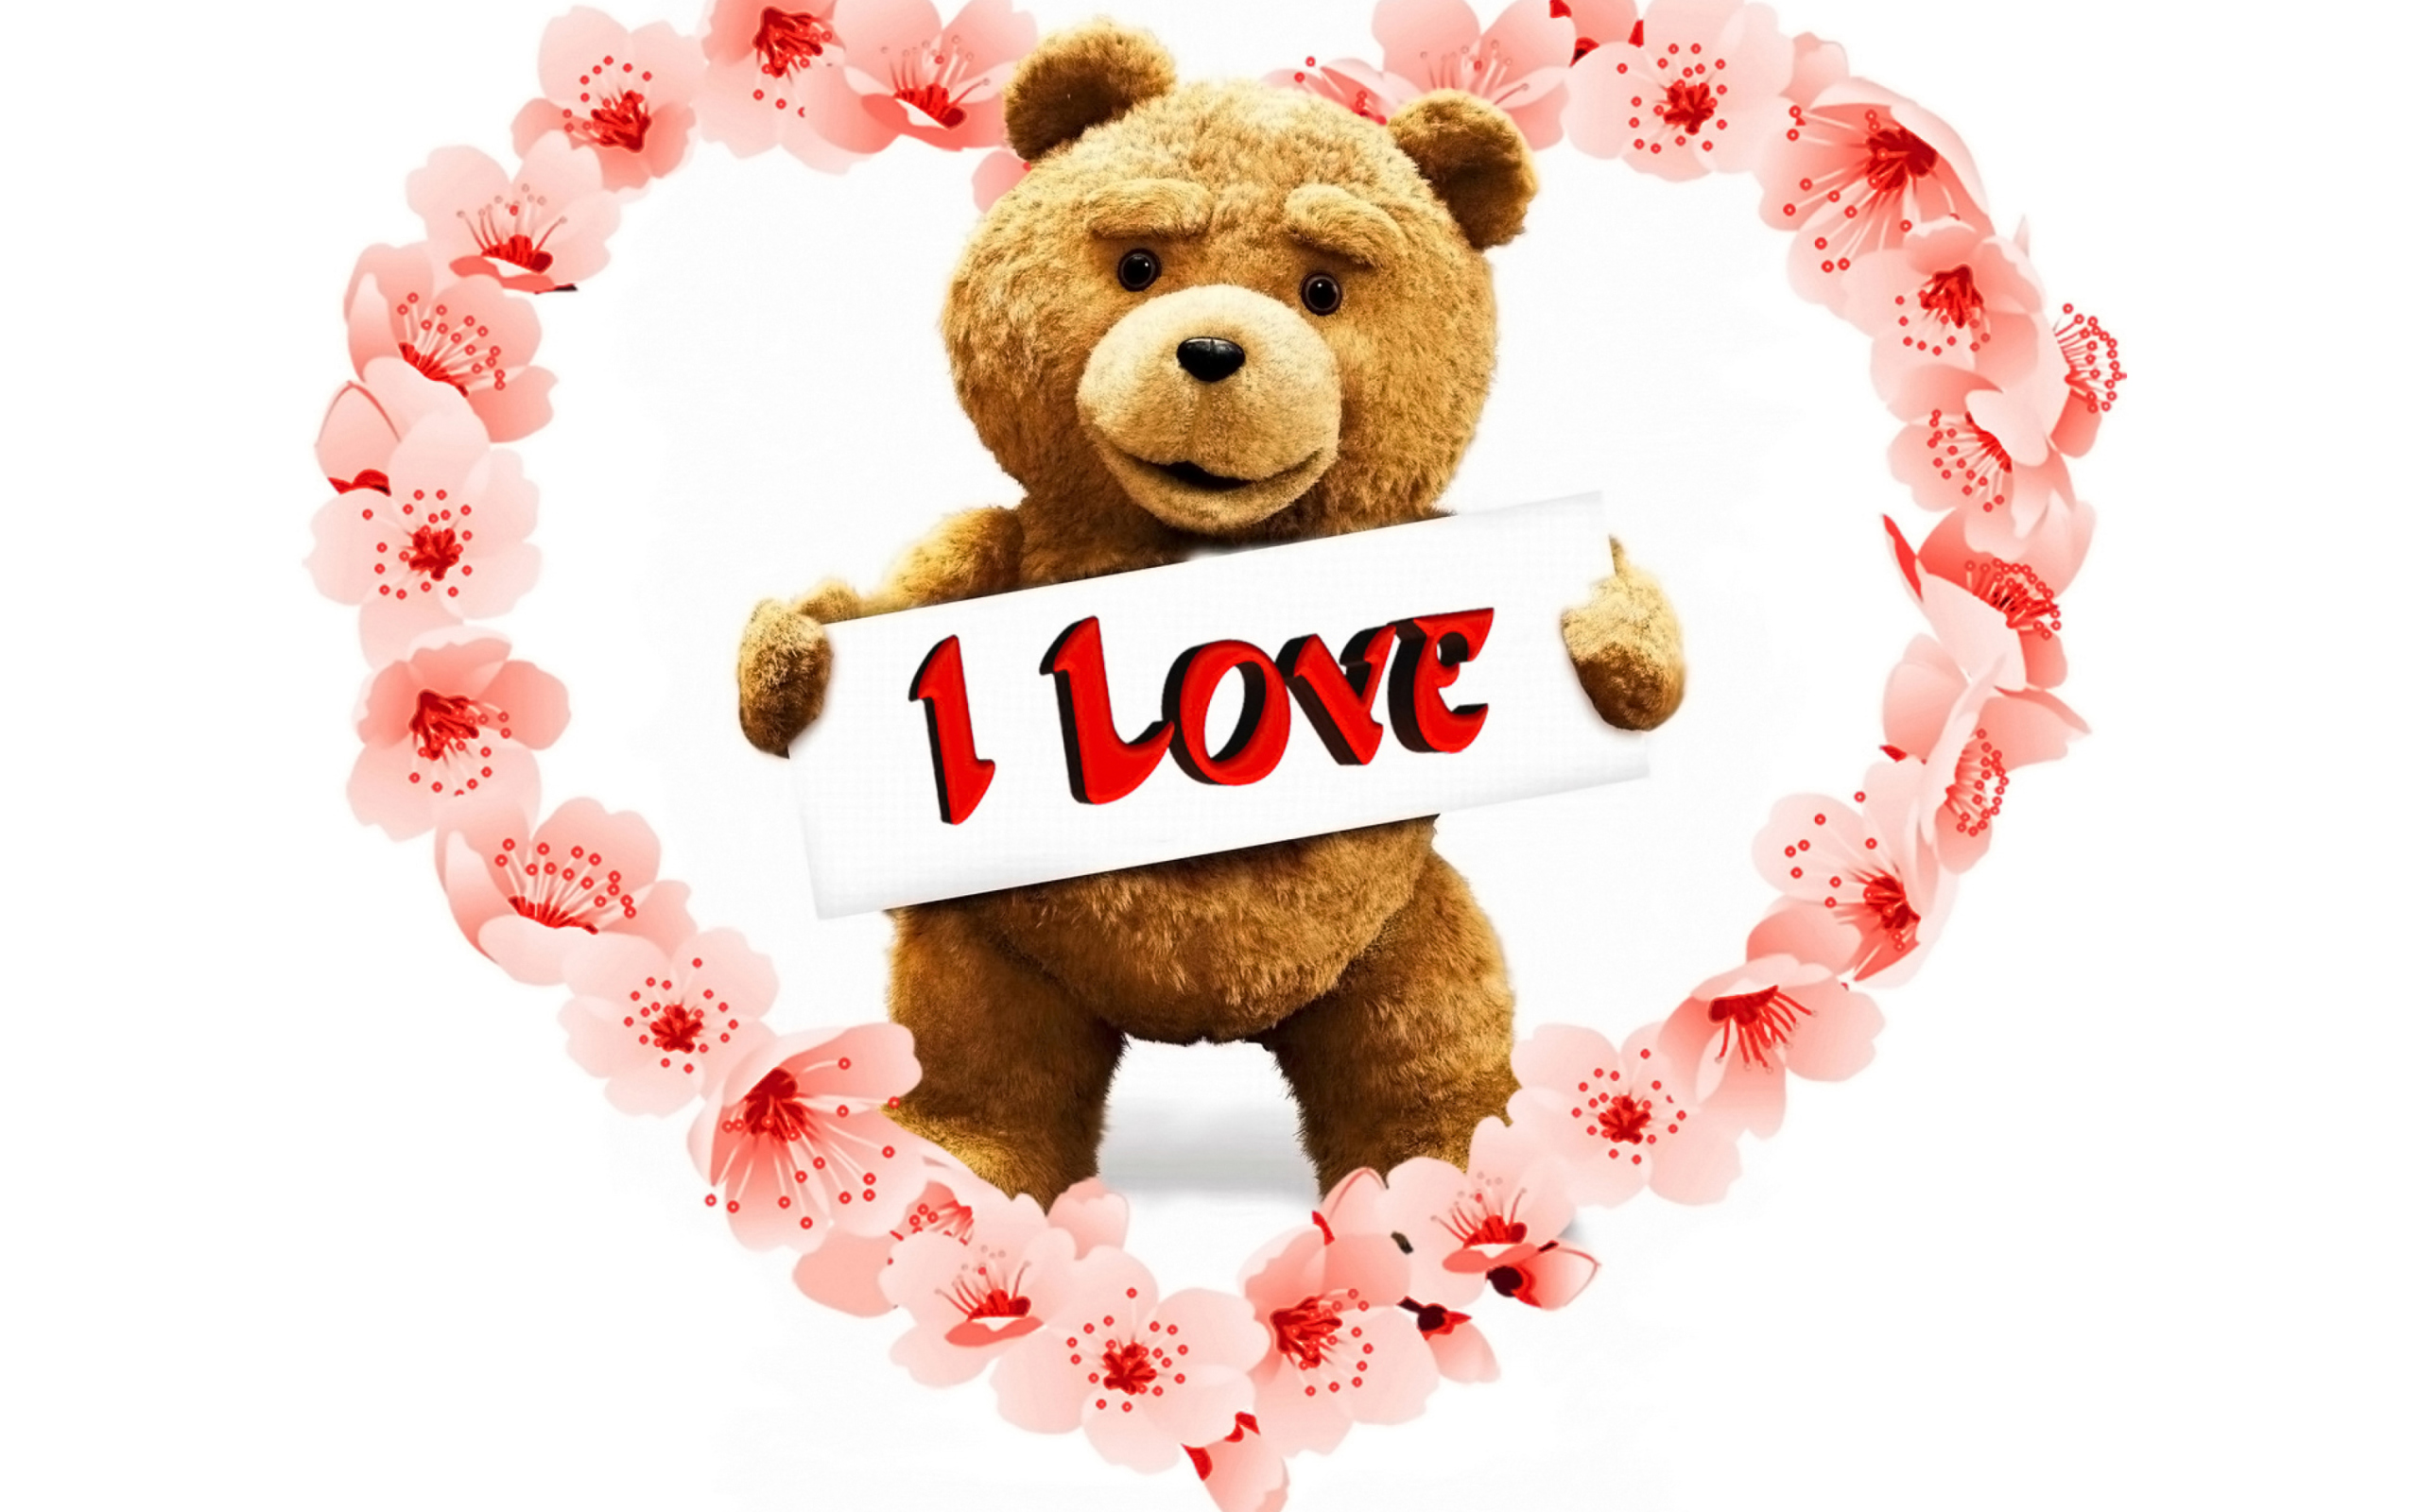 Love Ted wallpaper 2560x1600